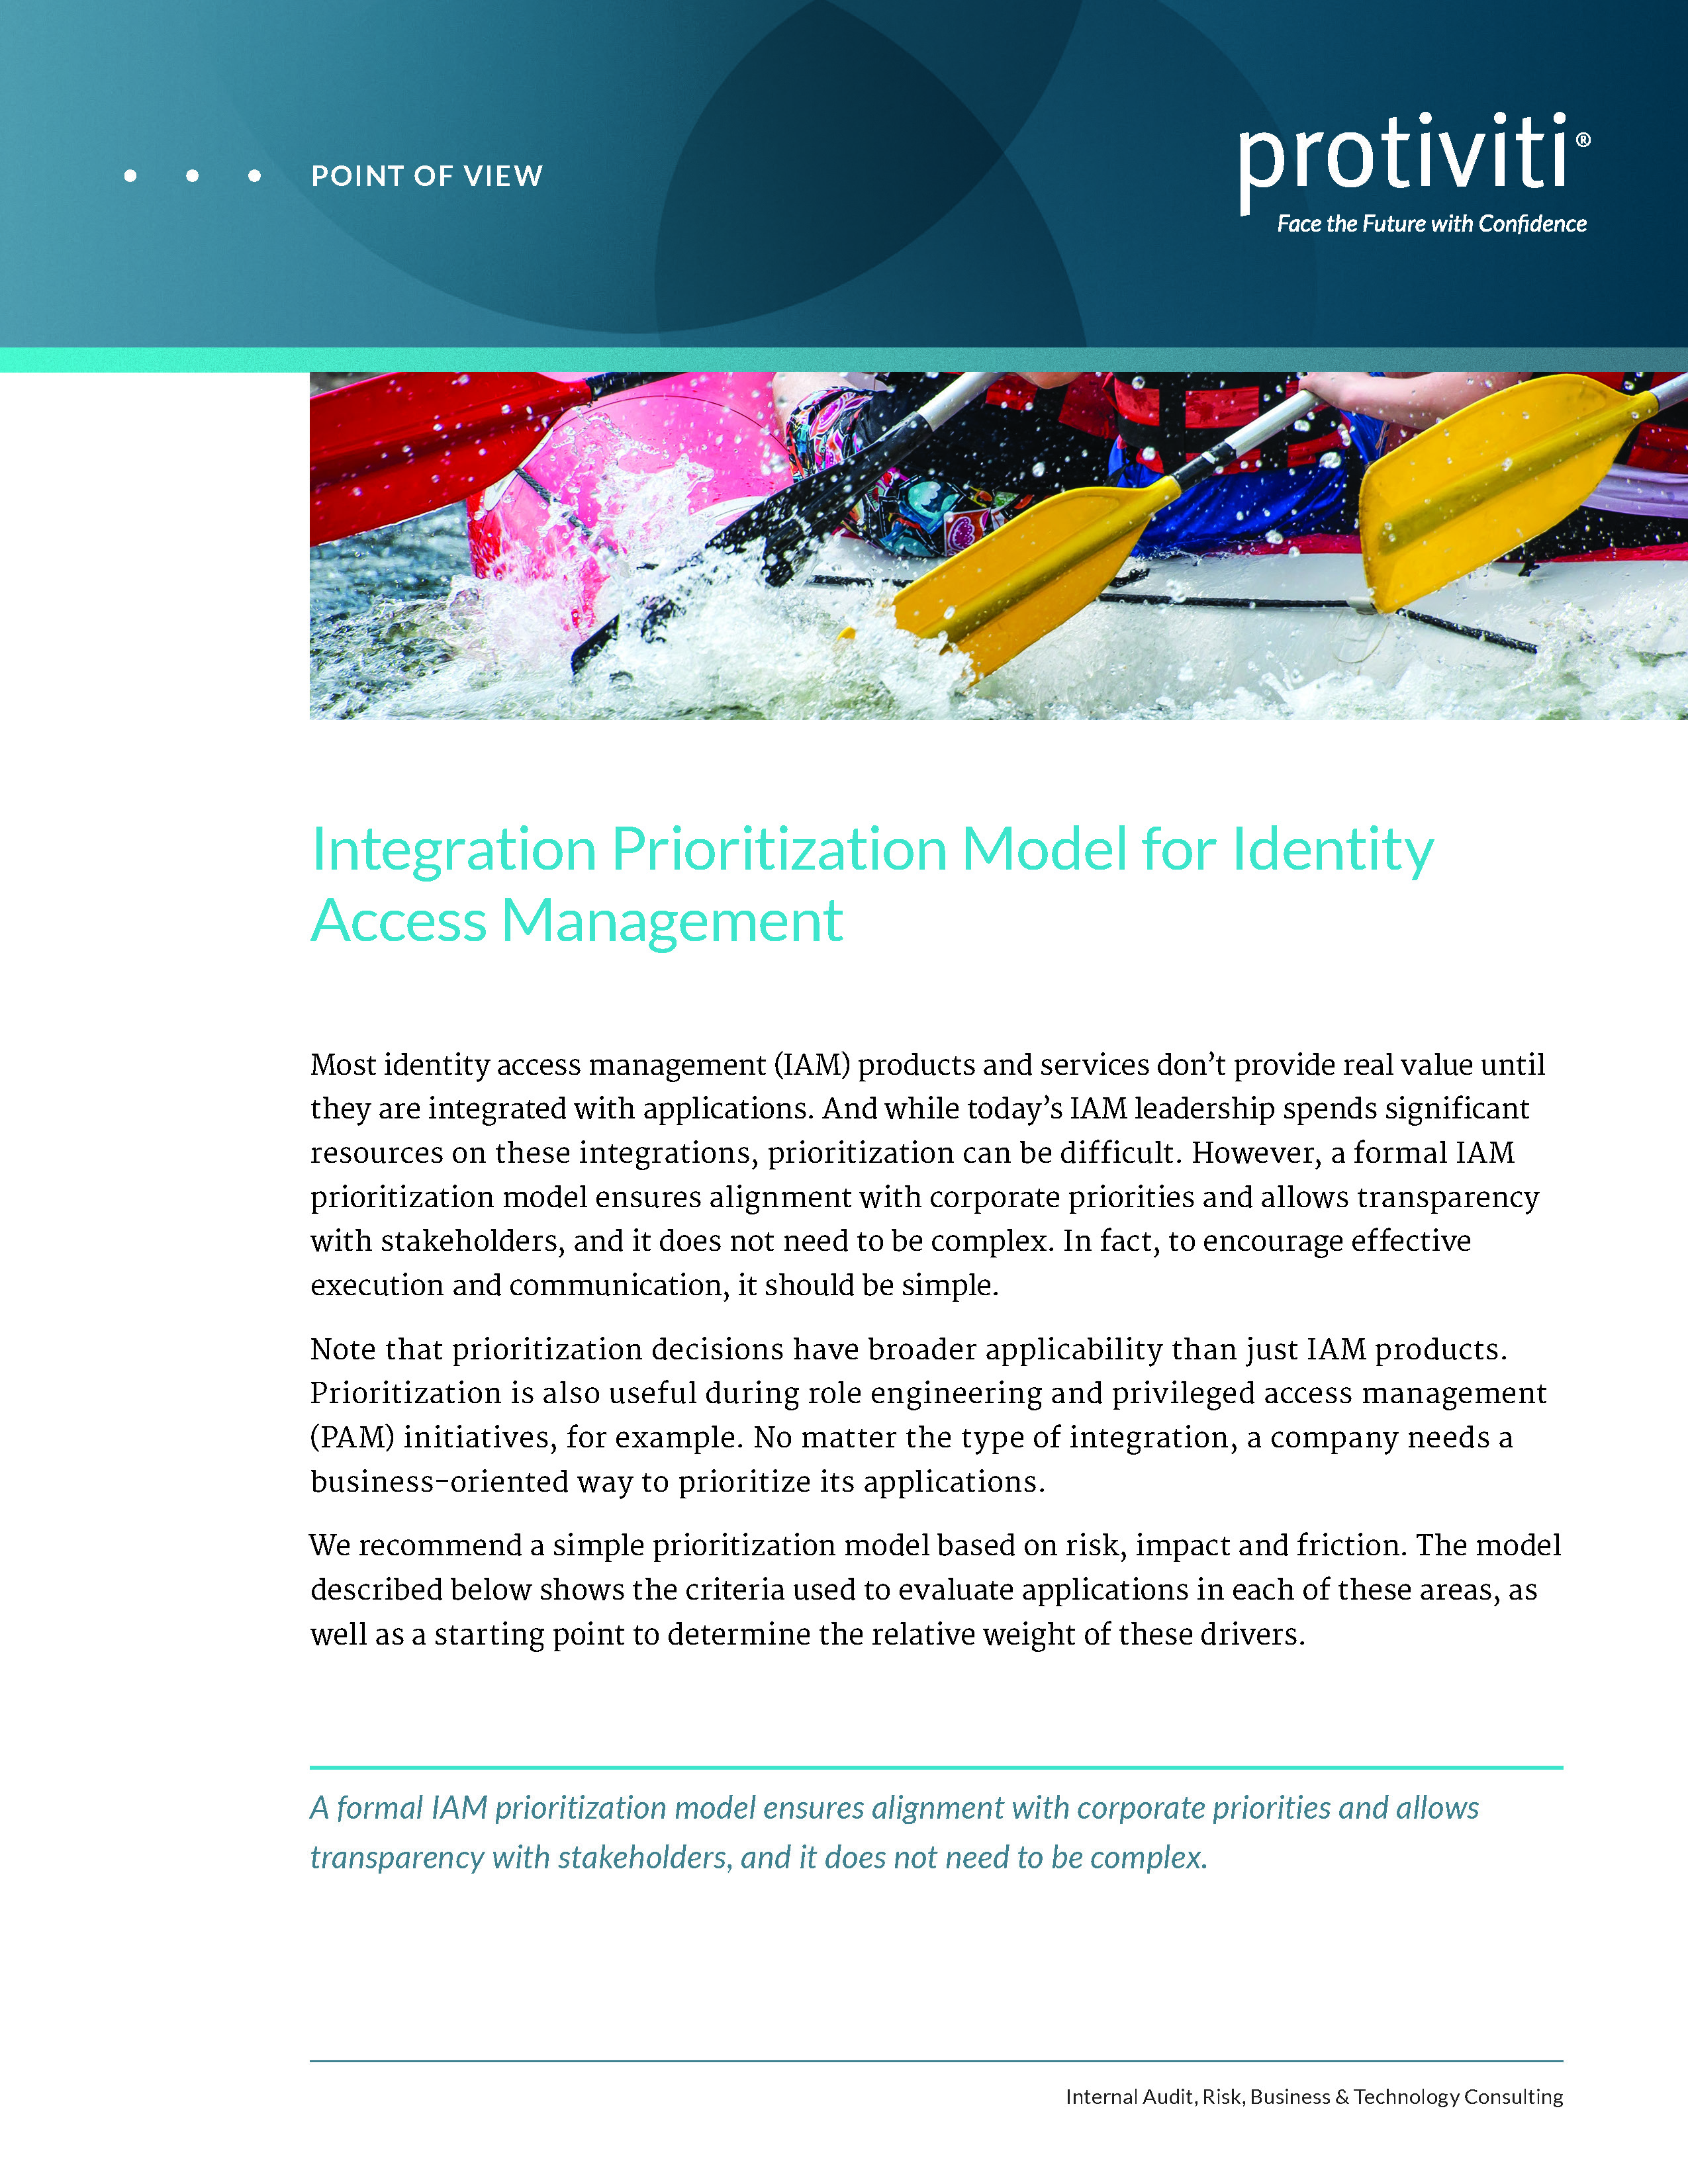 Screenshot of the first page of Integration Prioritization Model for Identity Access Management